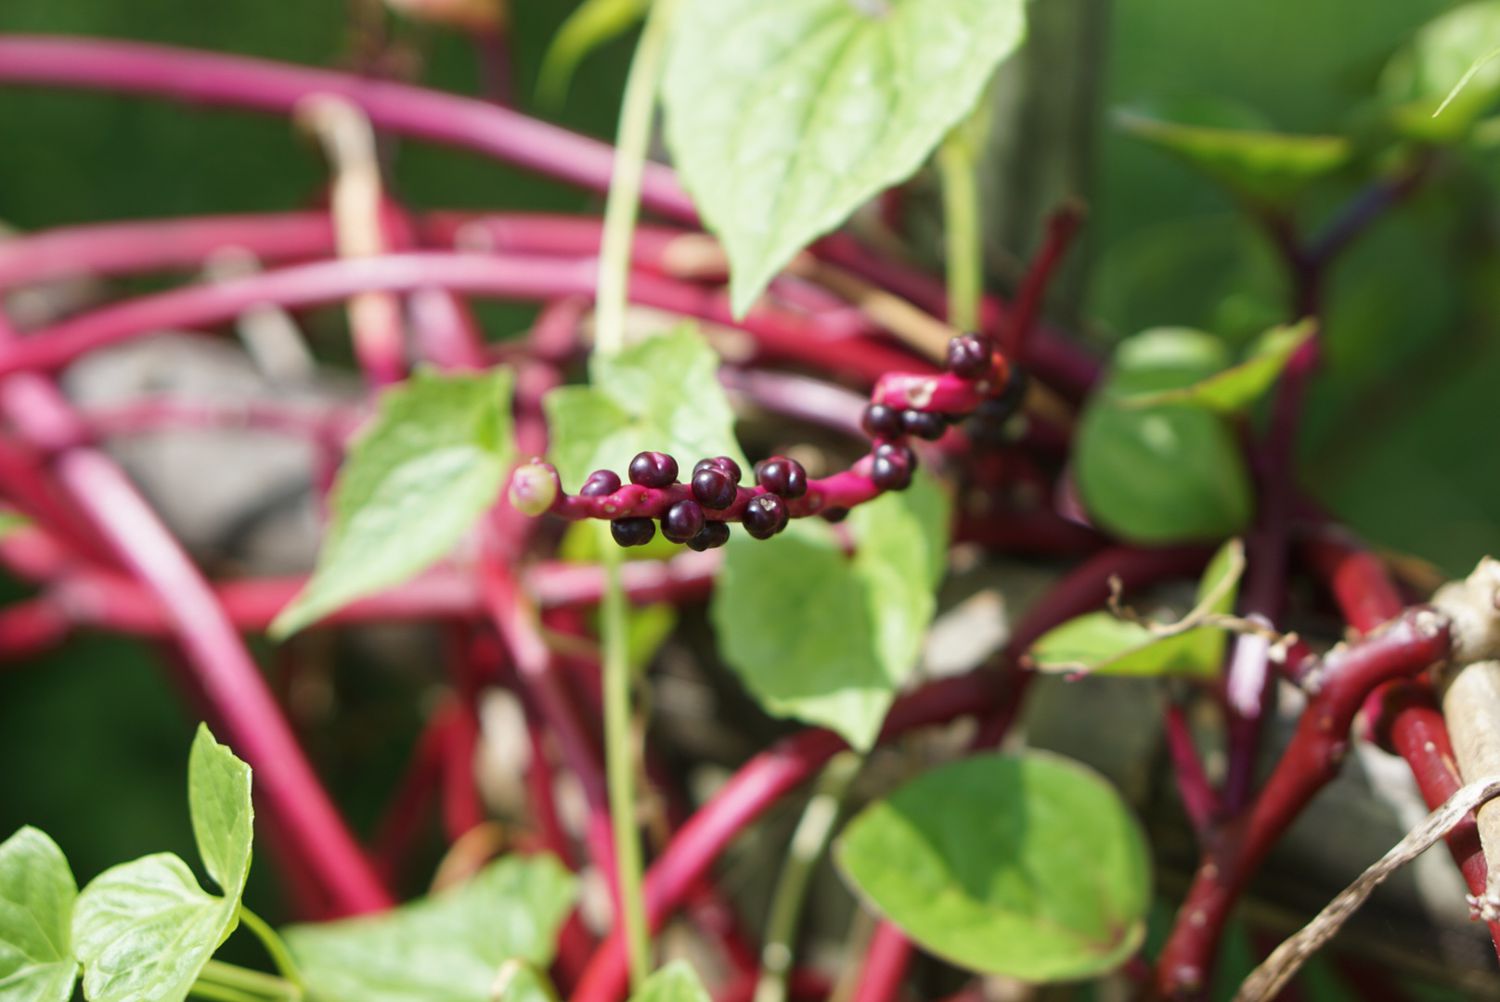 Malabar spinach vine with small purple berries and budding berry on end